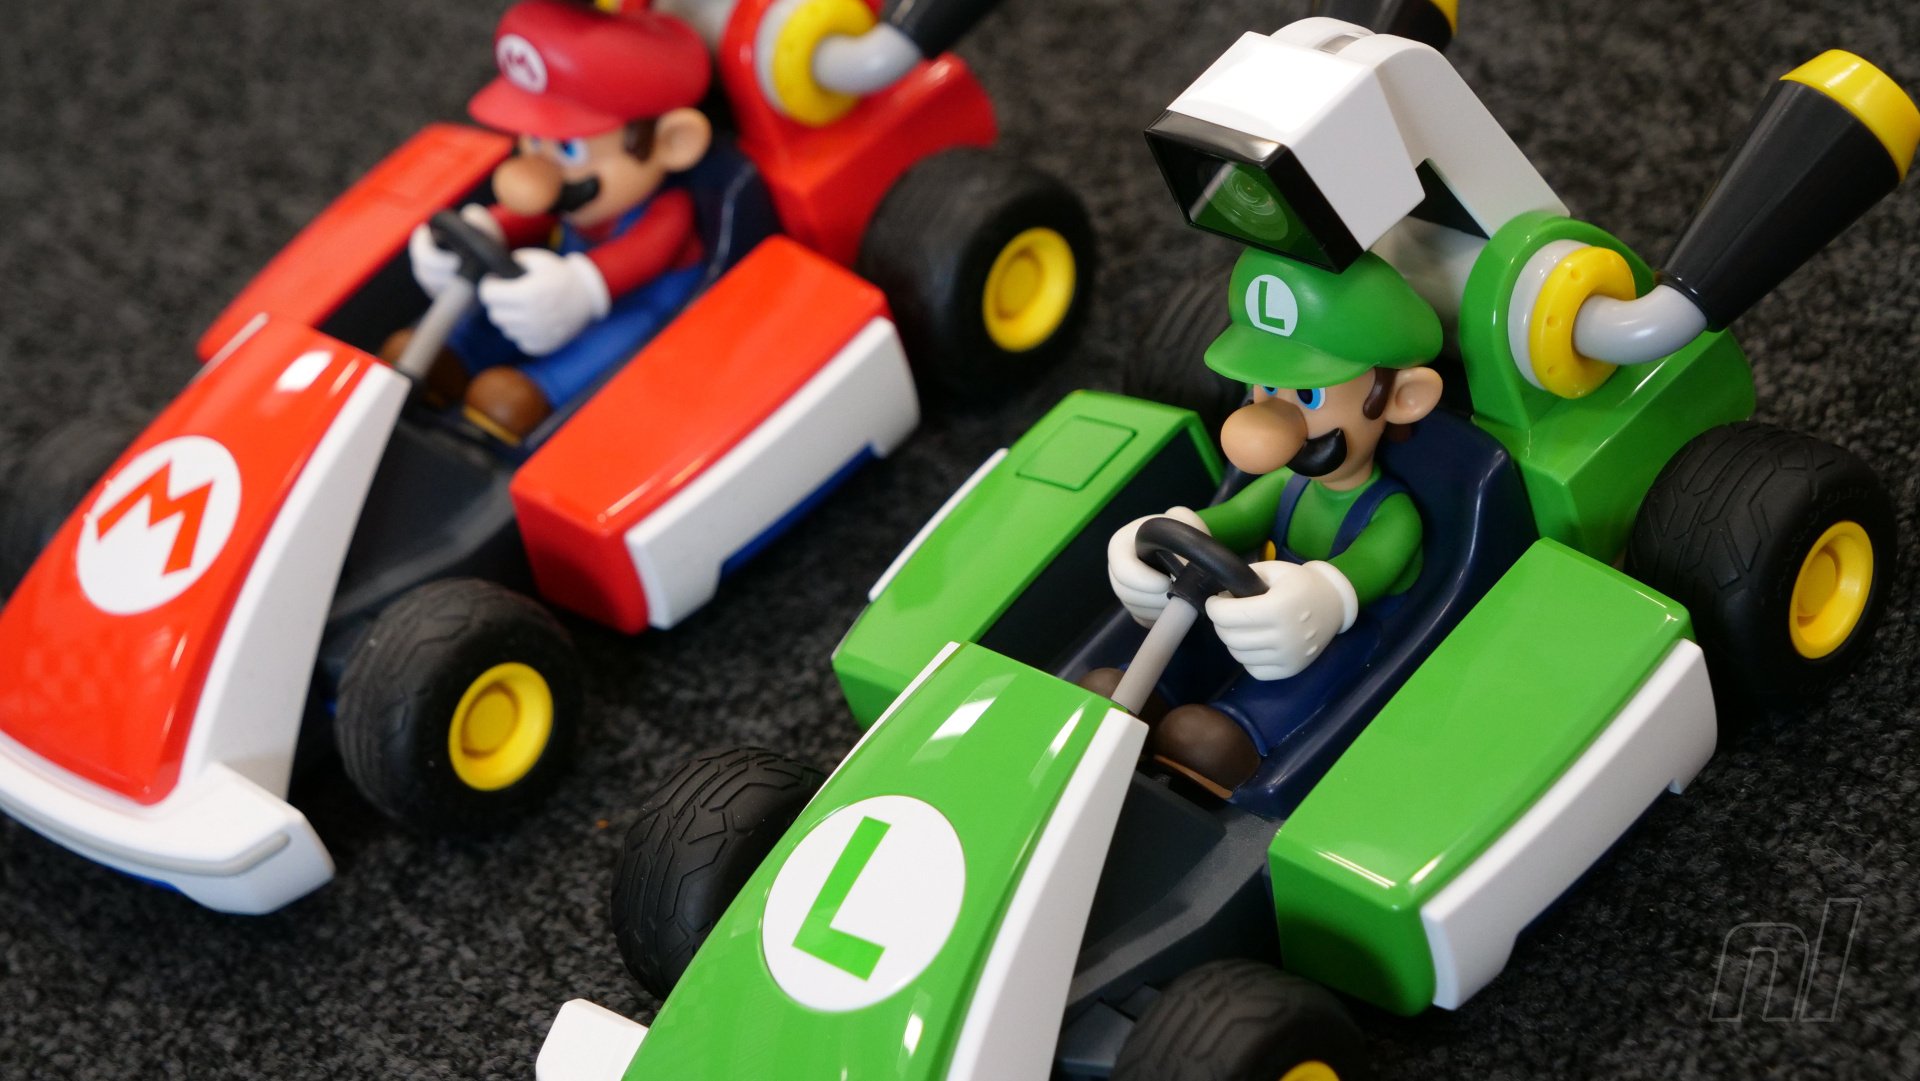 Lego Mario Kart: Home Circuit combo is the best video you'll see today